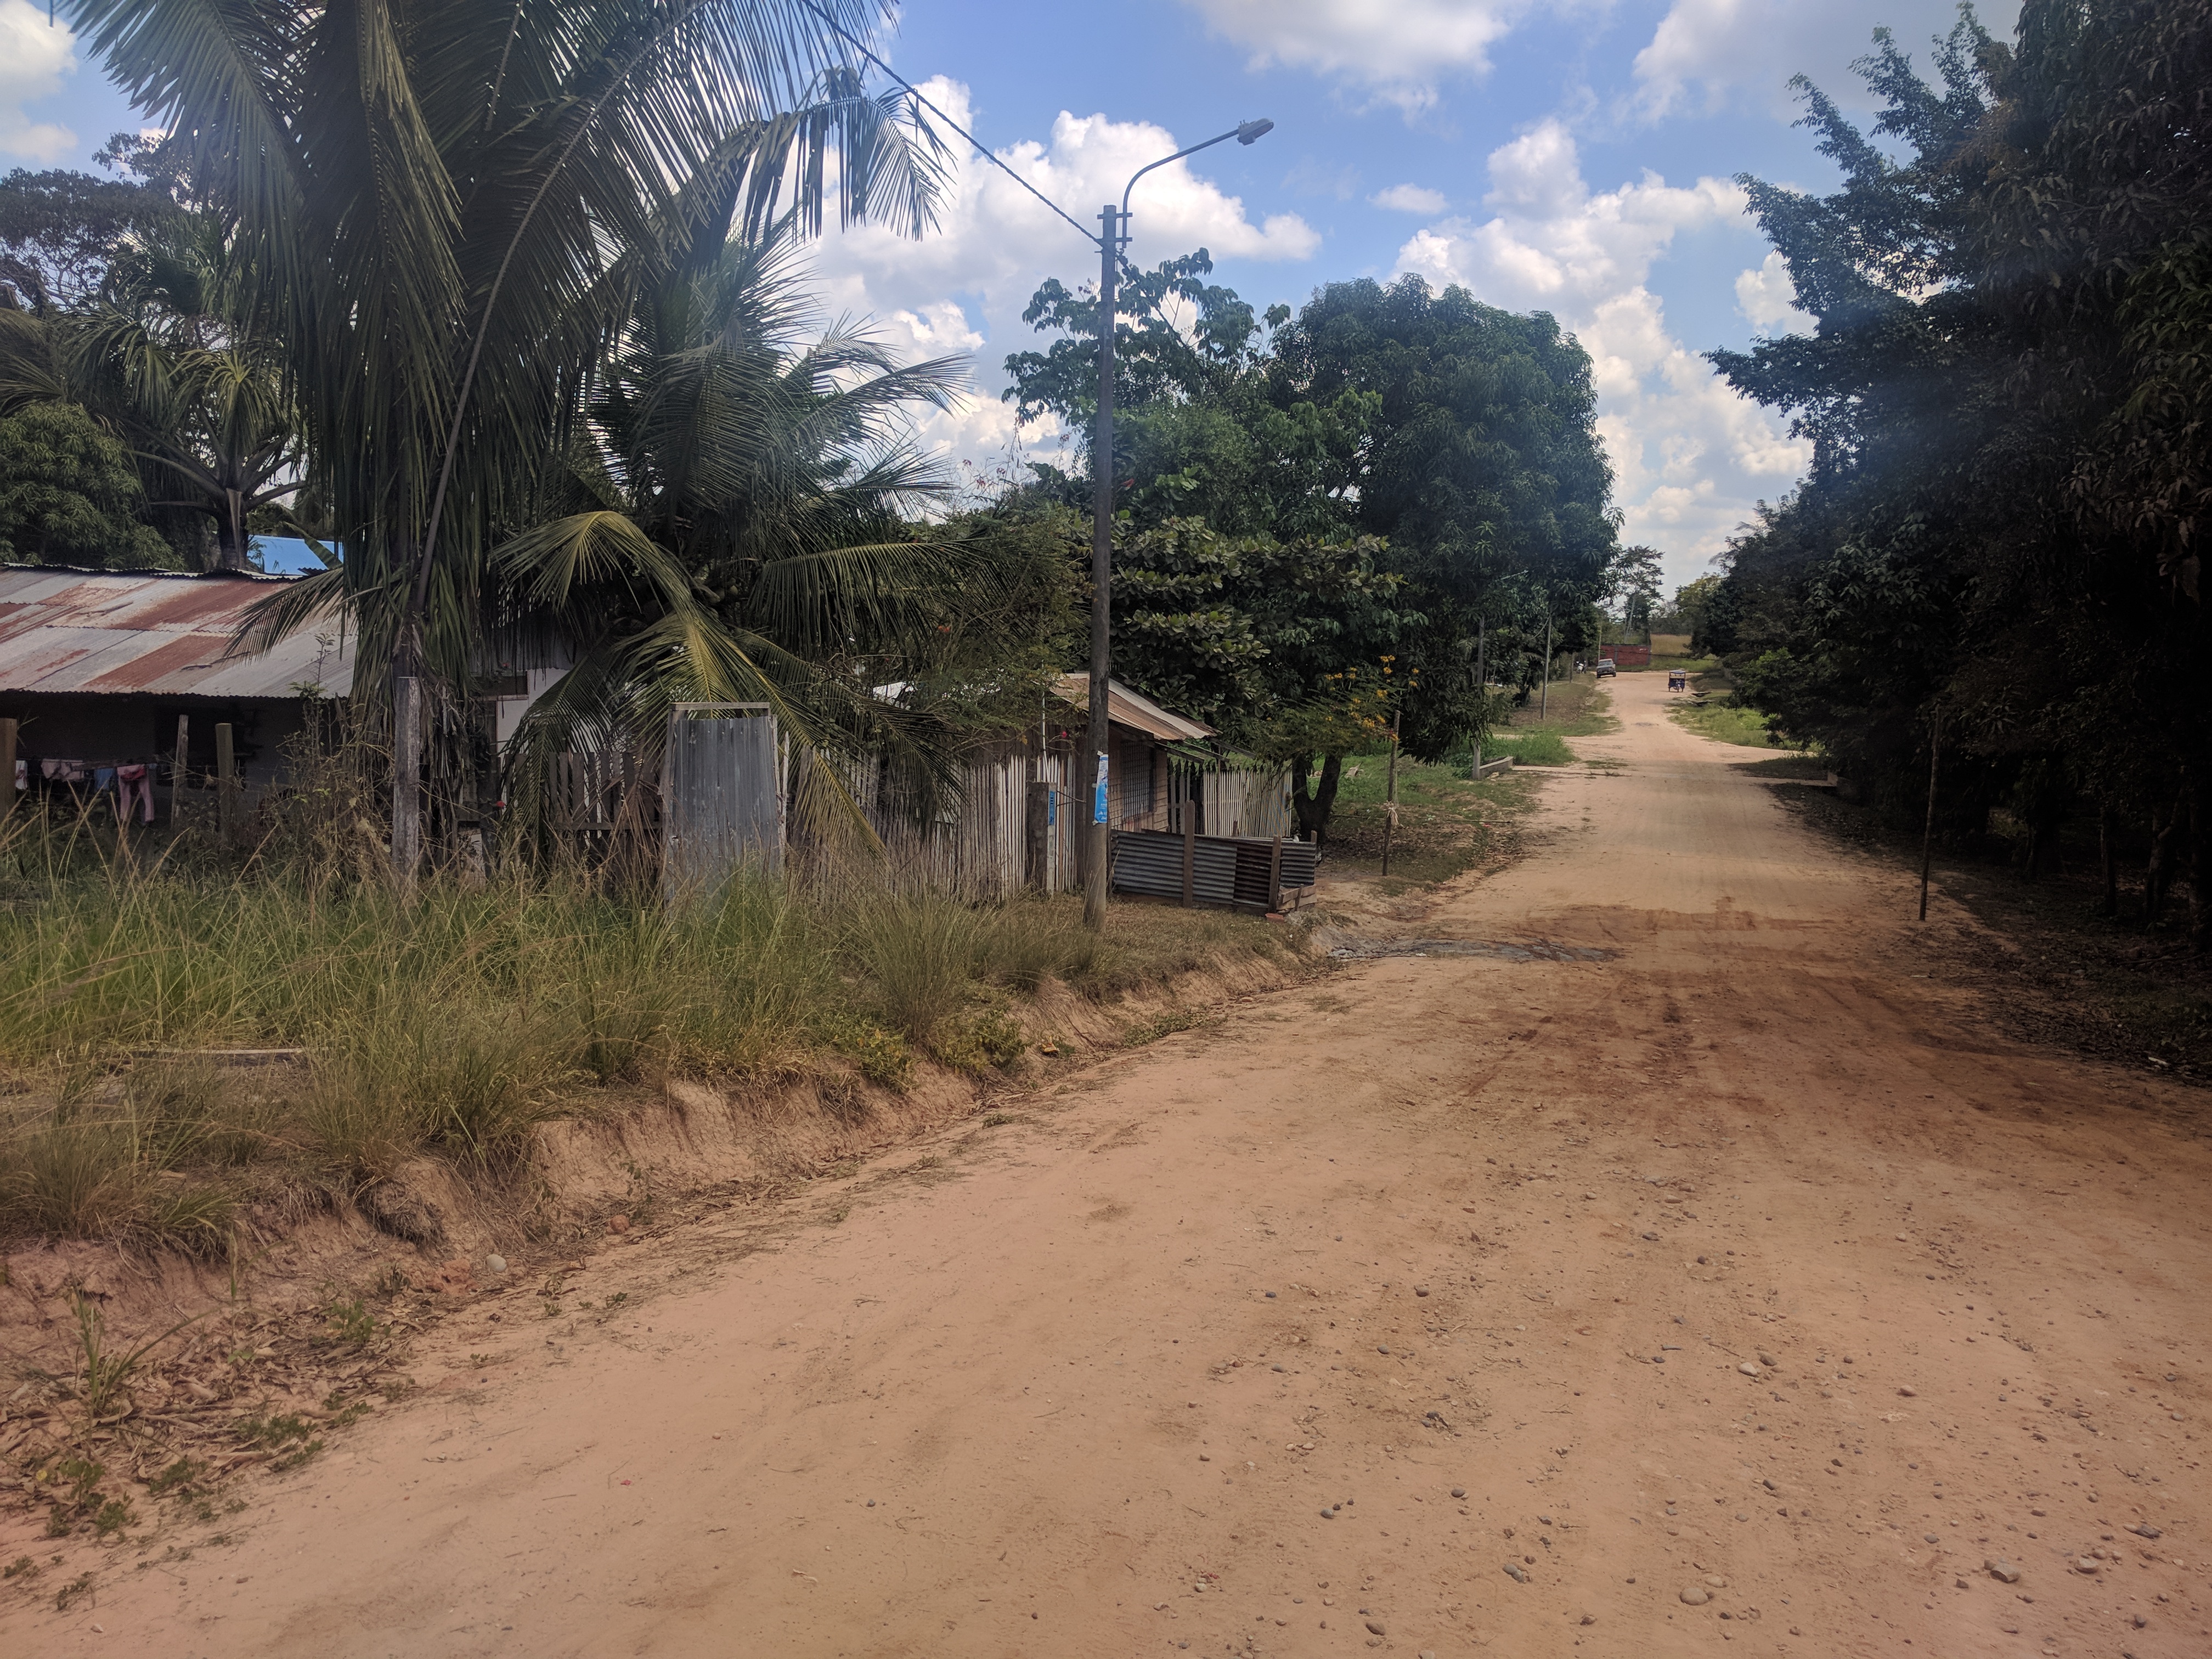 The road from the team house to the church